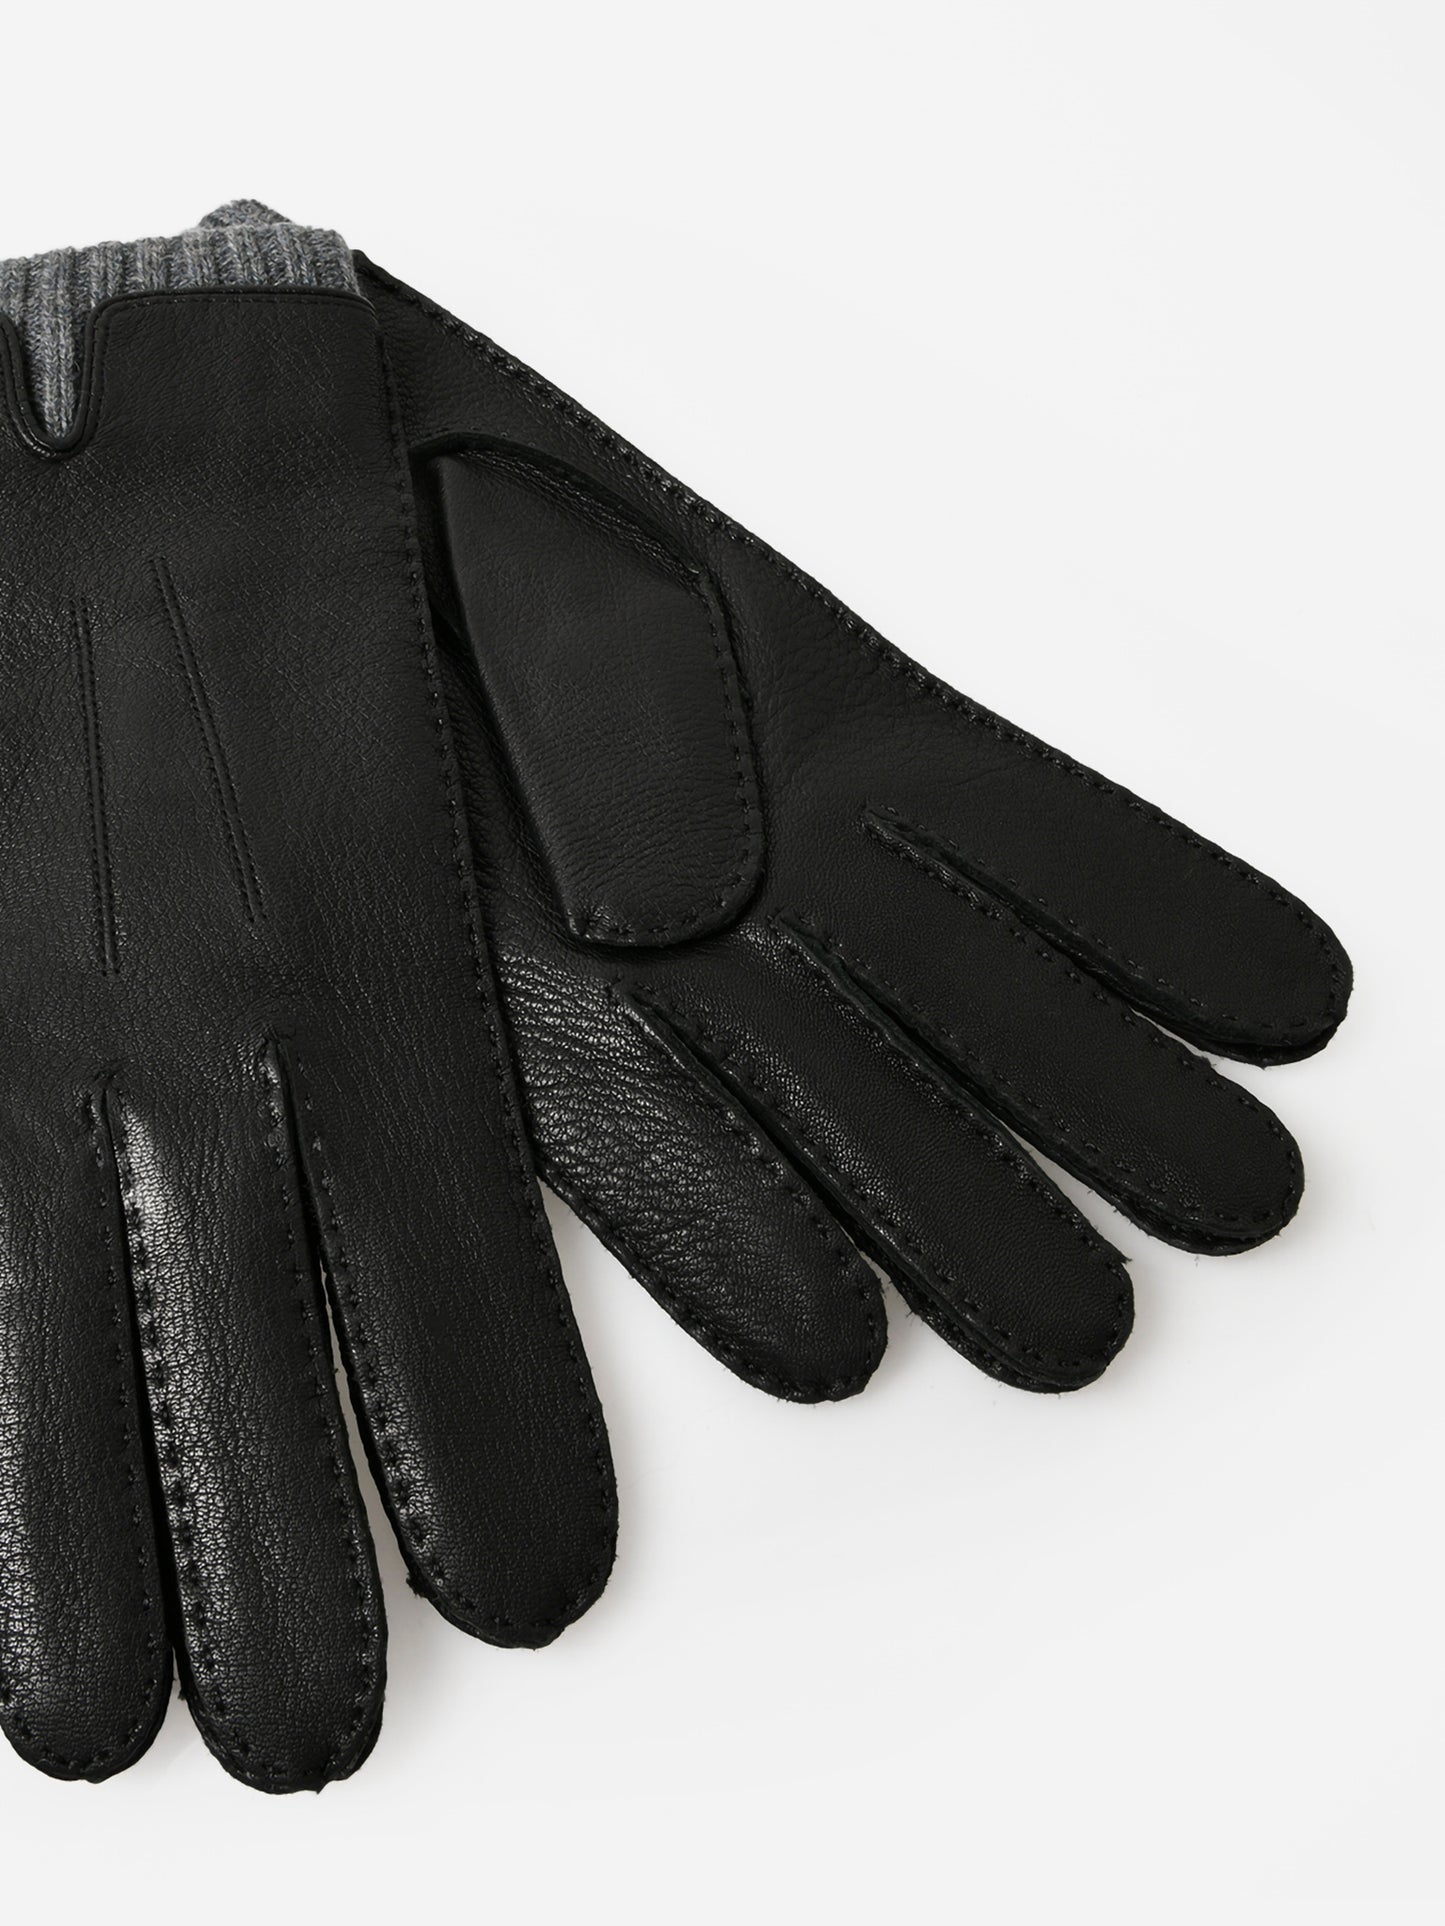 Vince Men's Cashmere Lined Leather Glove